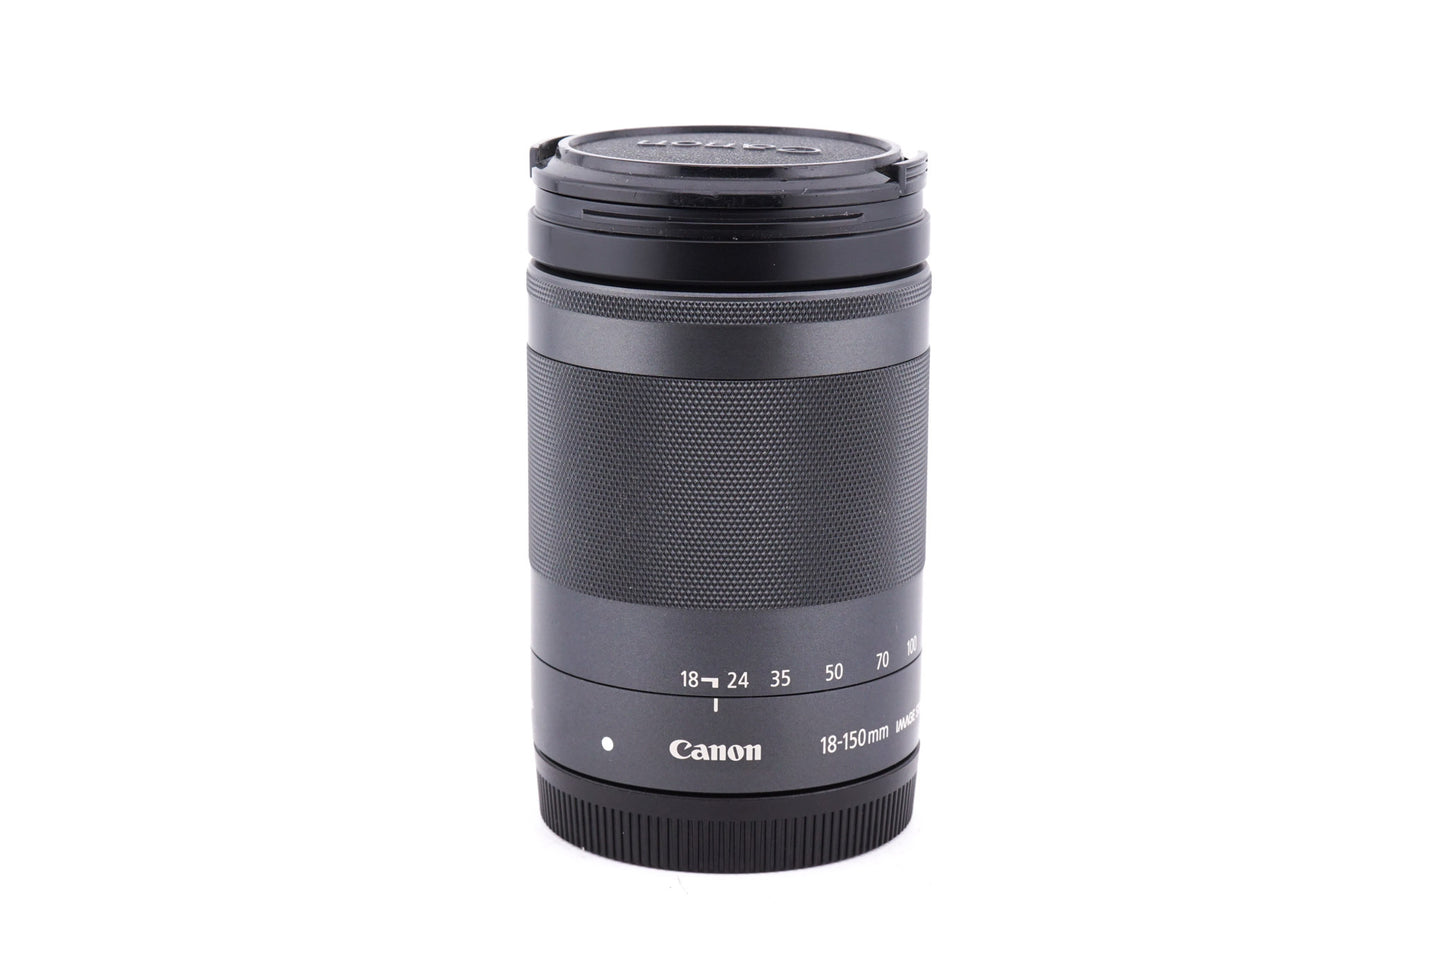 Canon 18-150mm f3.5-6.3 IS STM - Lens